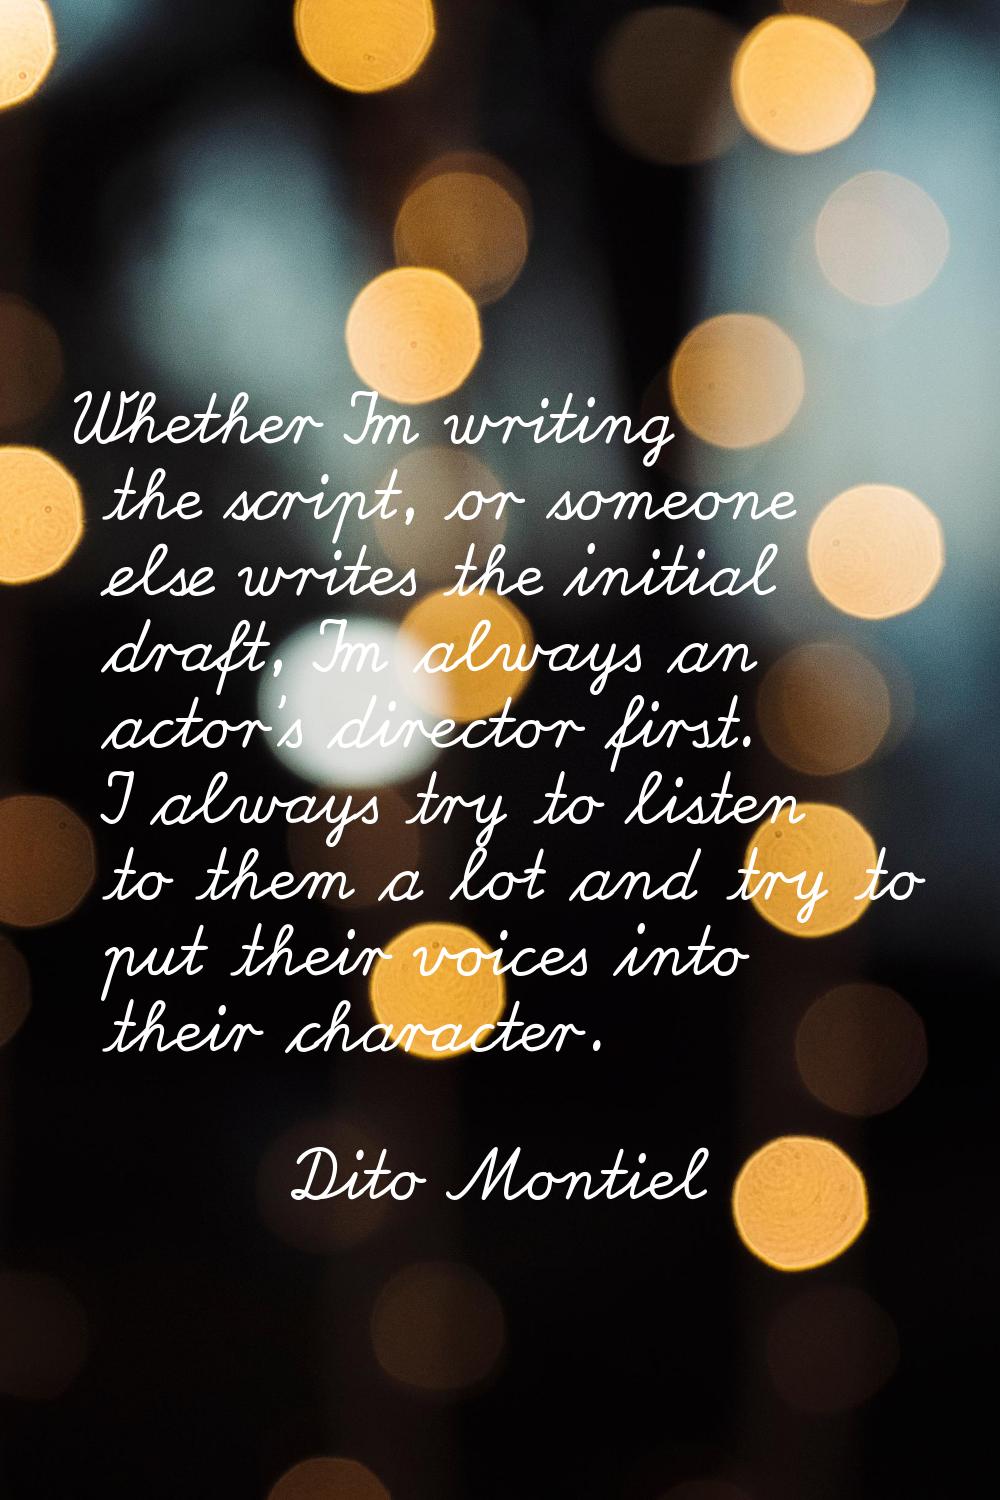 Whether I'm writing the script, or someone else writes the initial draft, I'm always an actor's dir